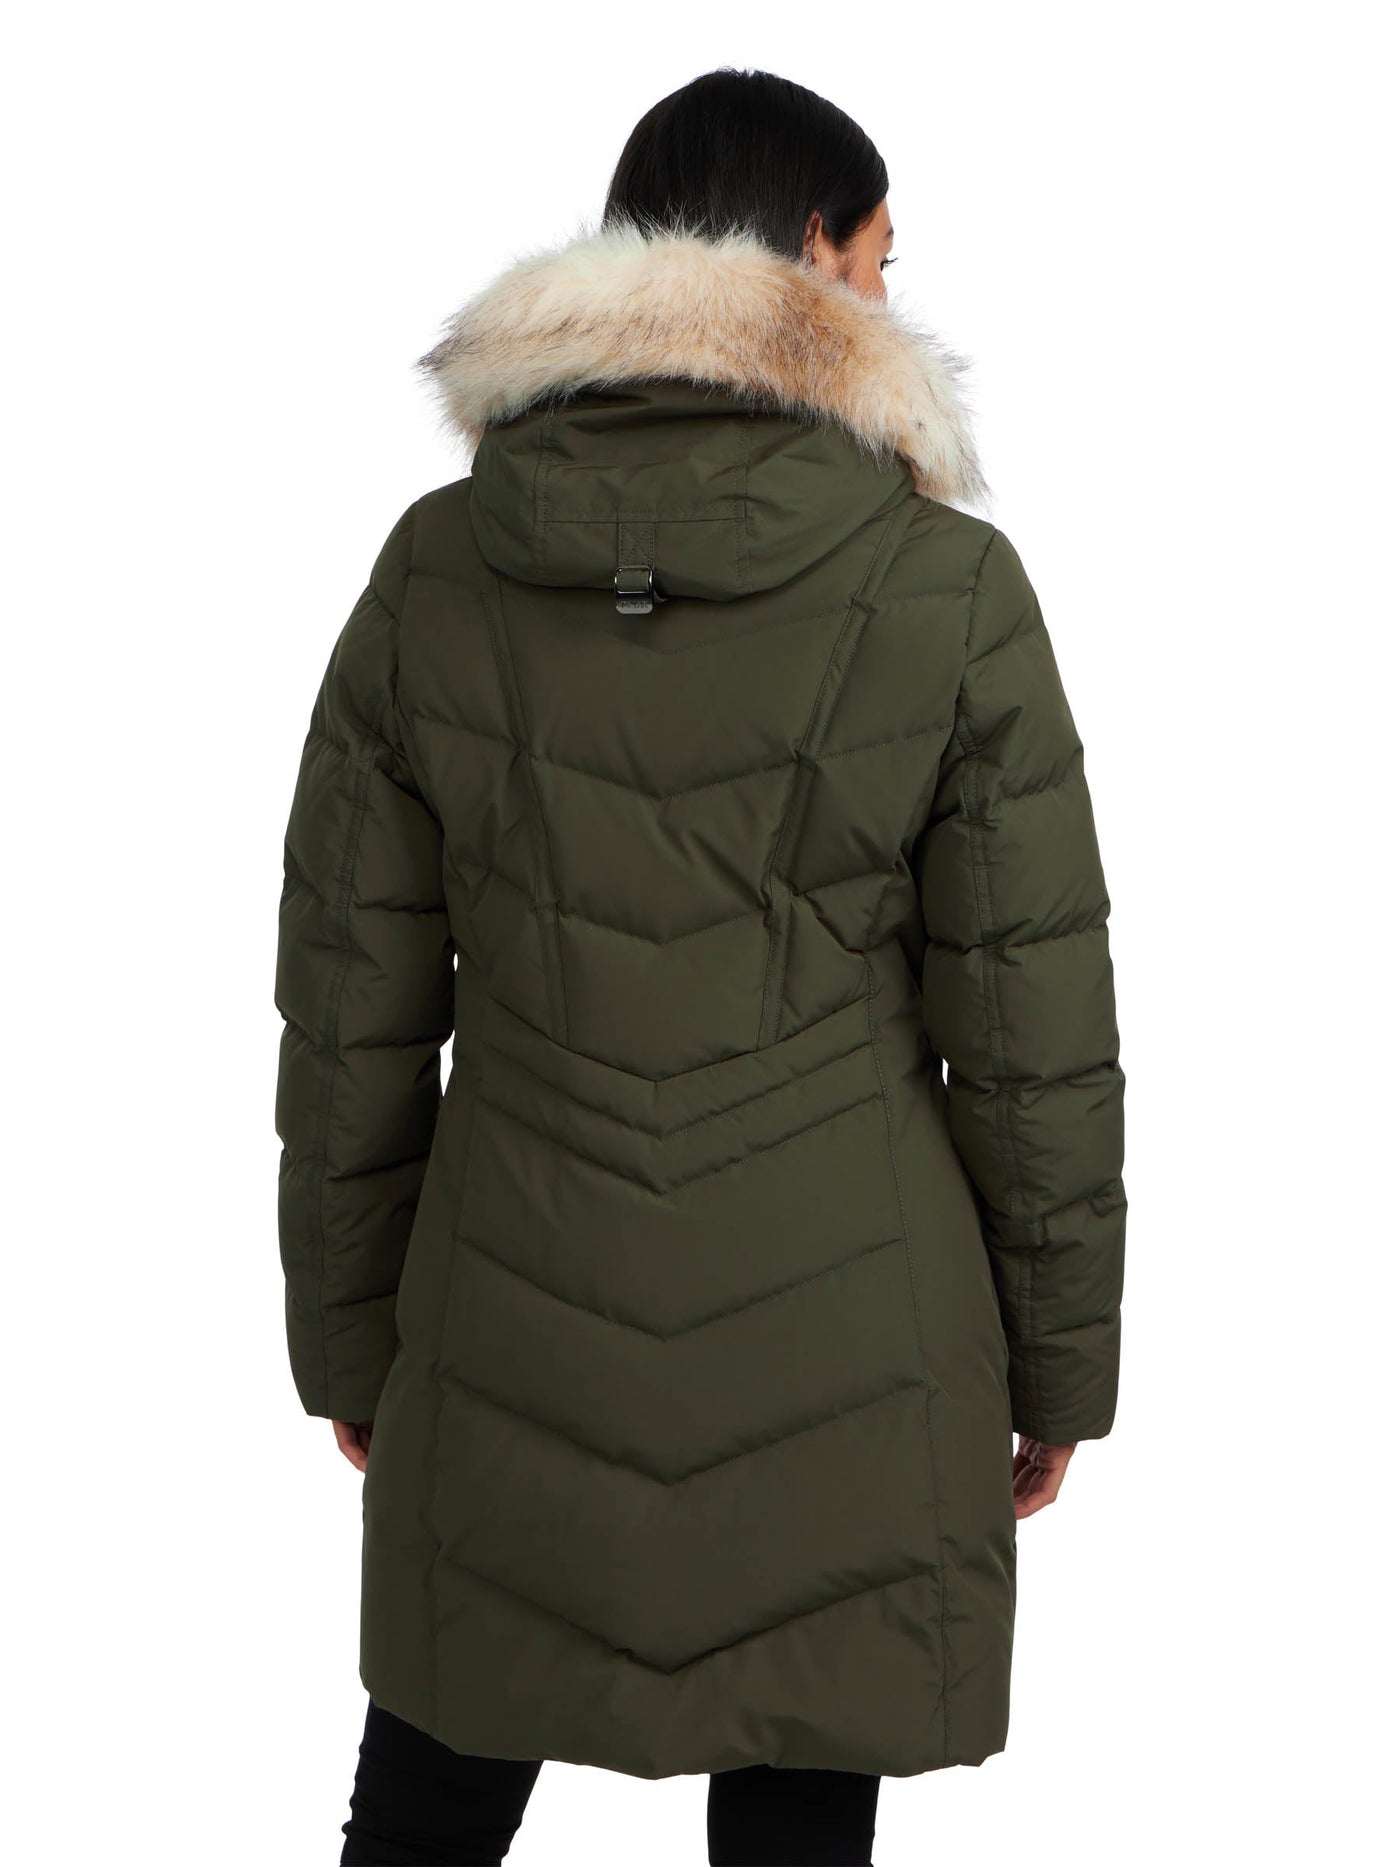 January Women's Quilted Puffer w/ Faux Fur